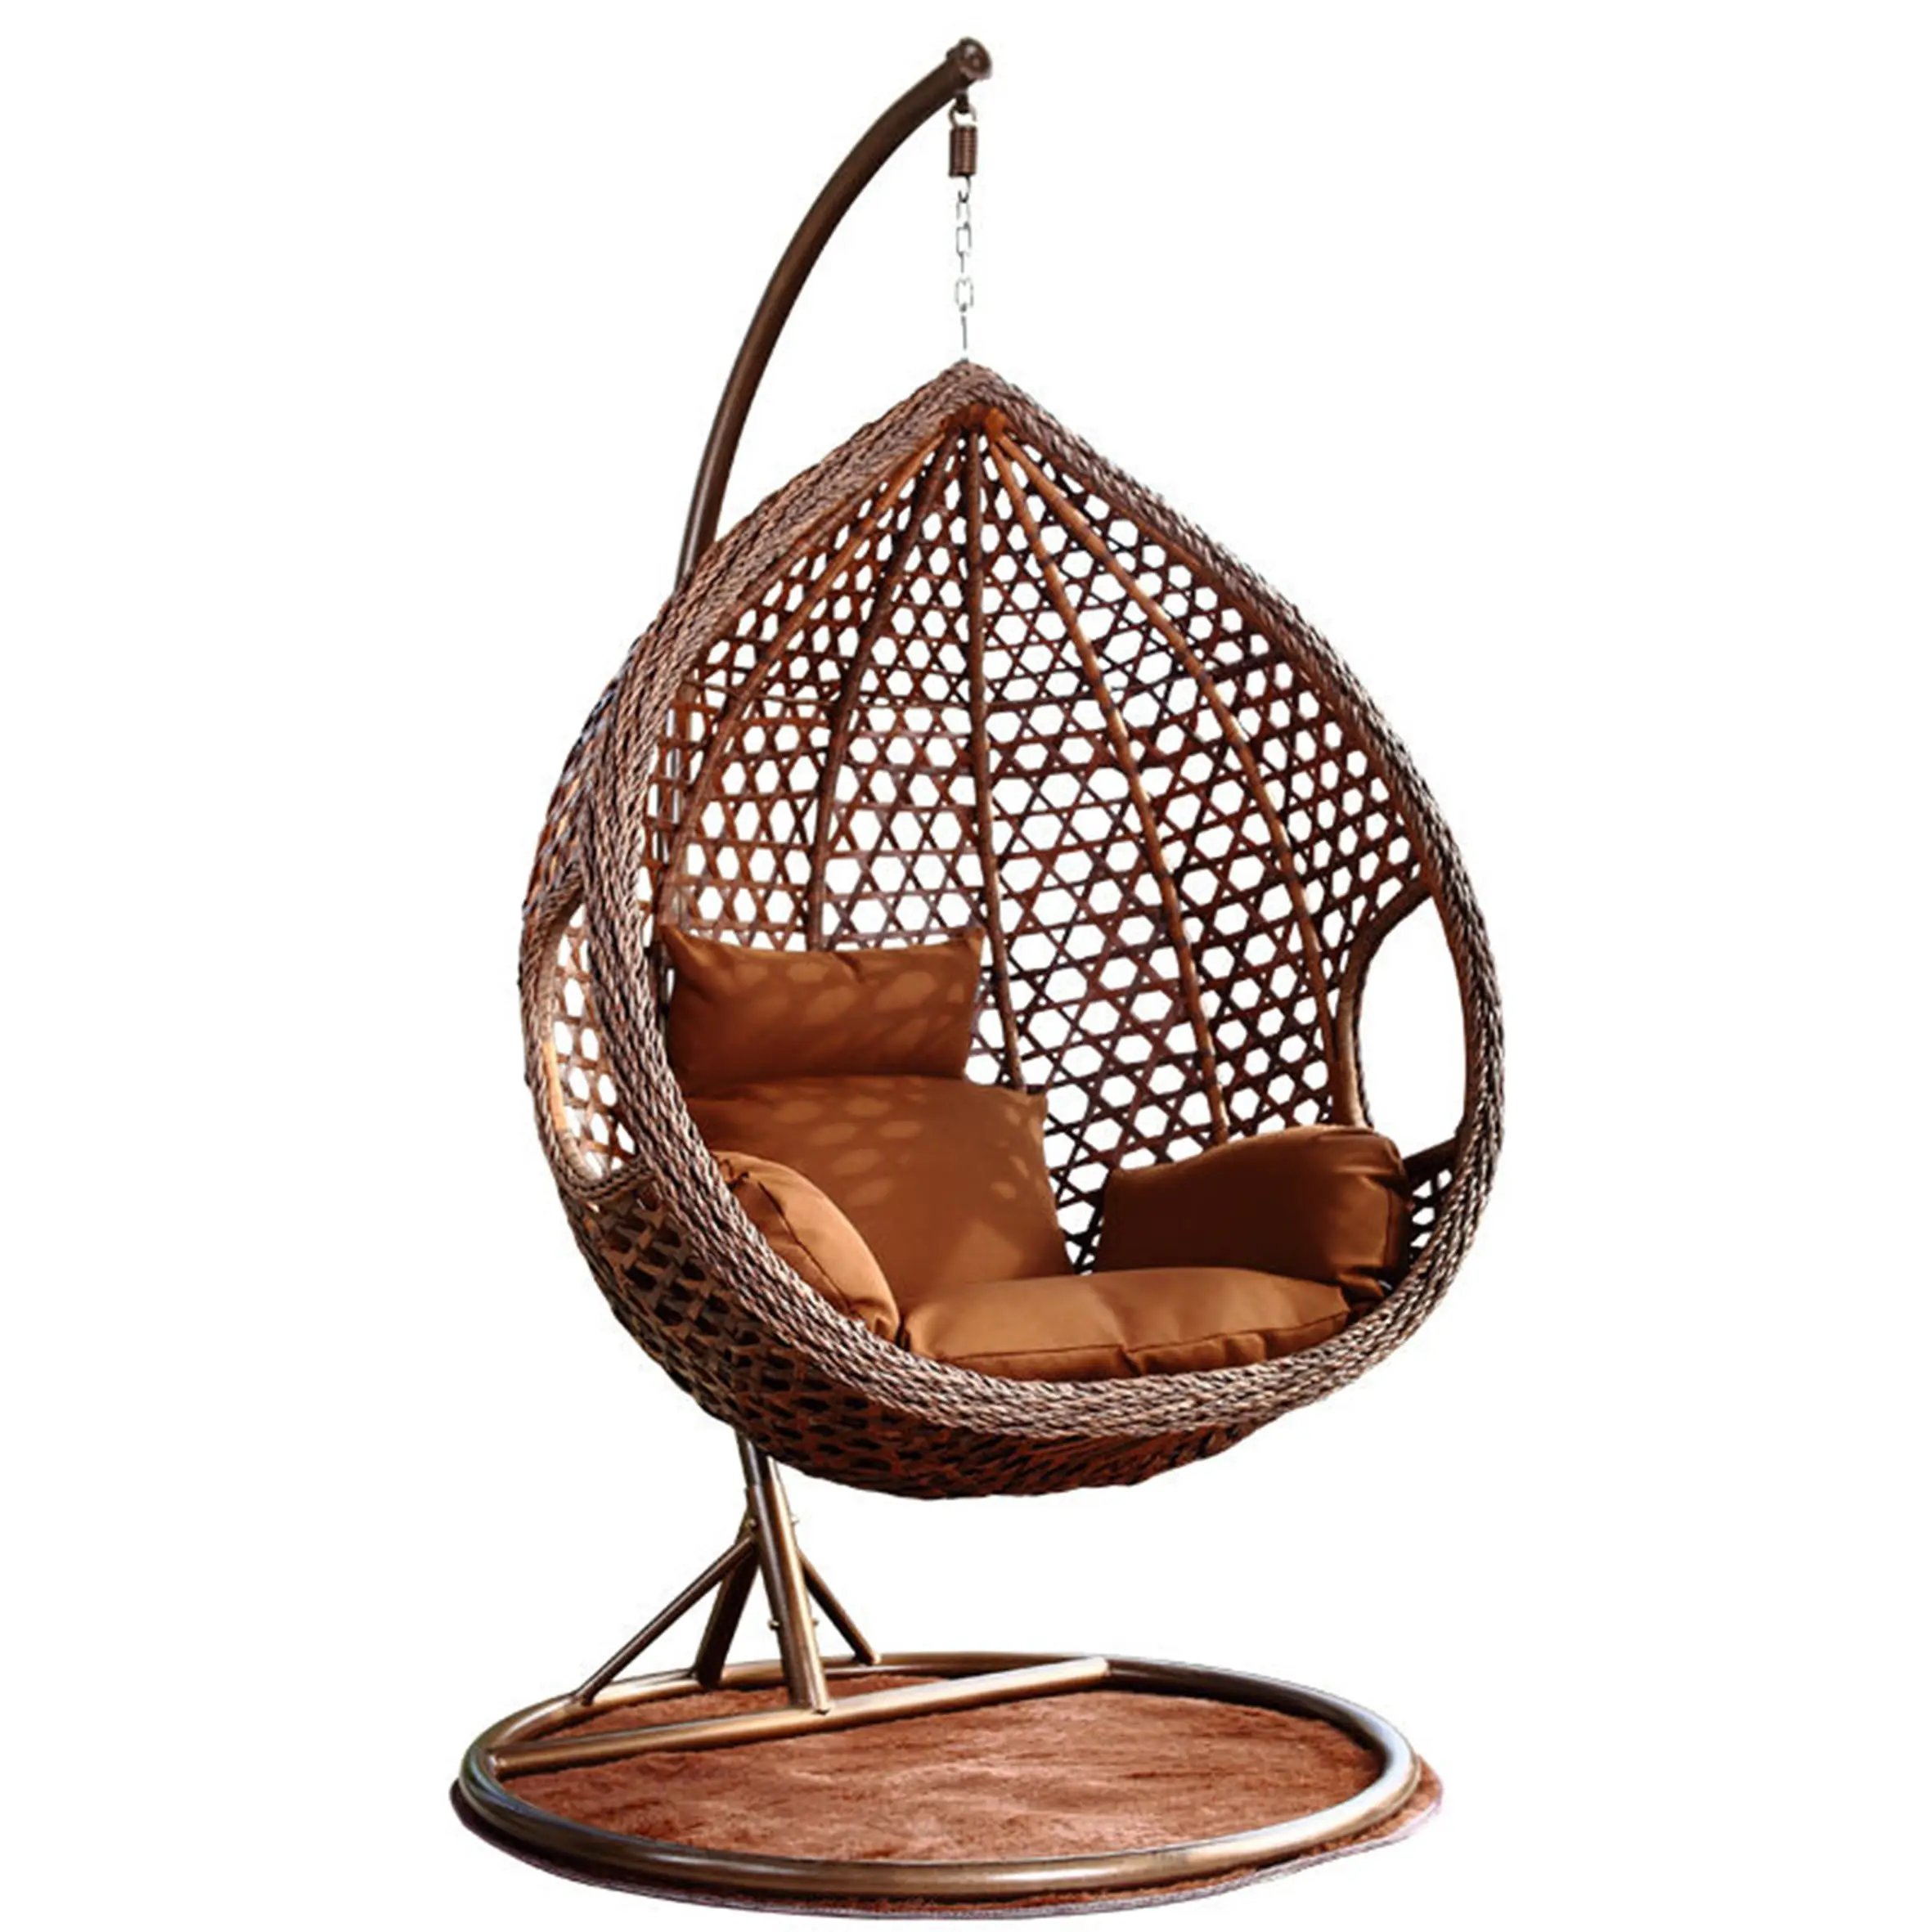 On Sale Popular Fashion Design Hanging Patio Porch,Garden Pe Rattan Sunbed Chaise Outdoor Wicker Chair Swings/